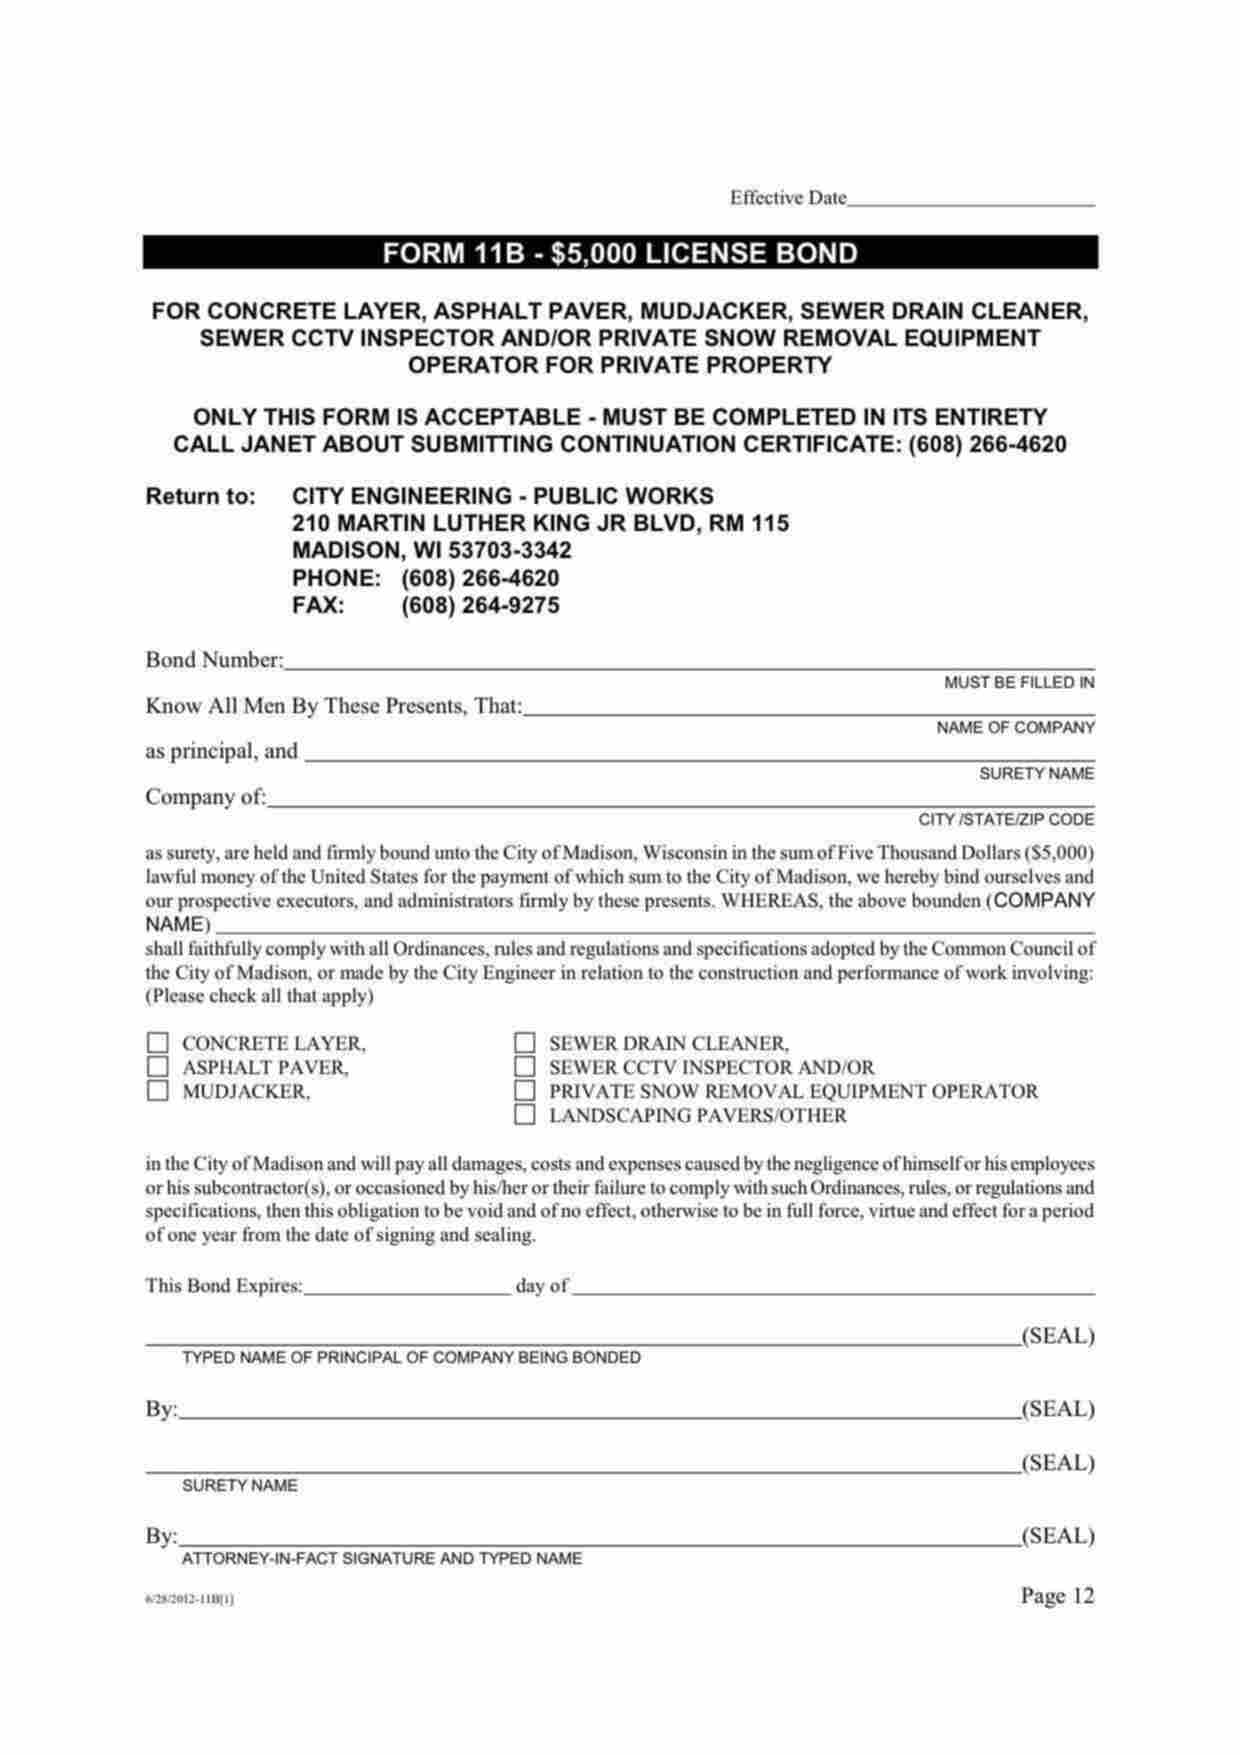 Wisconsin Private Snow Removal Equipment Operator Bond Form